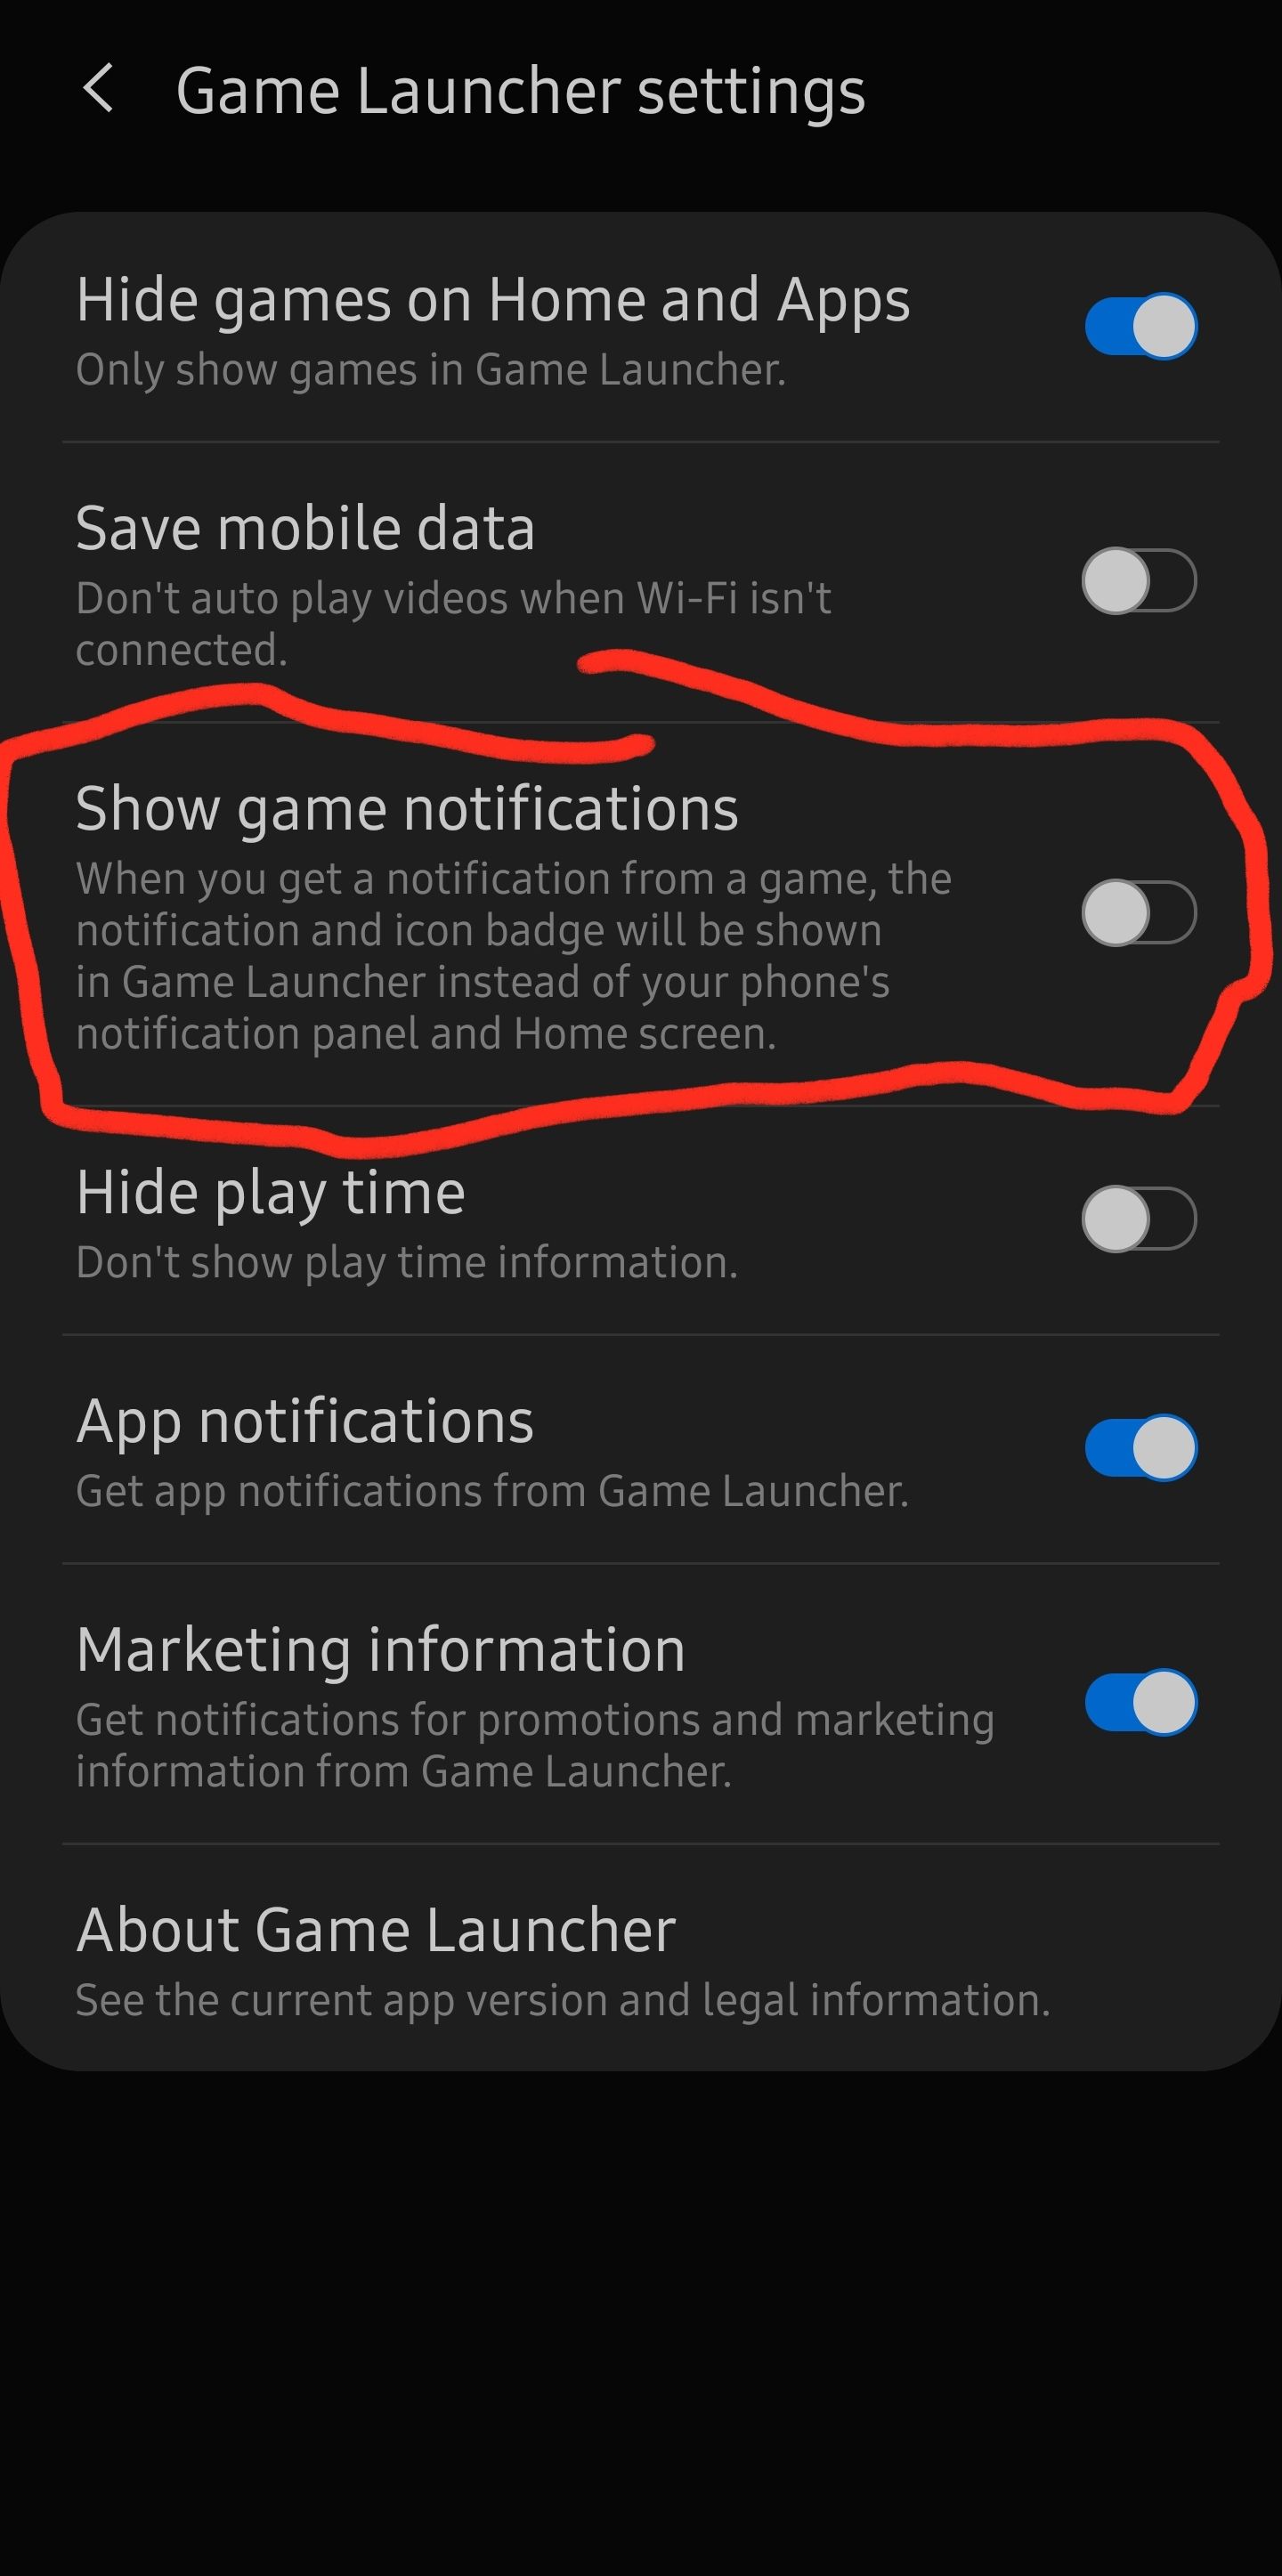 Is the Launcher working? What is the current launcher version?